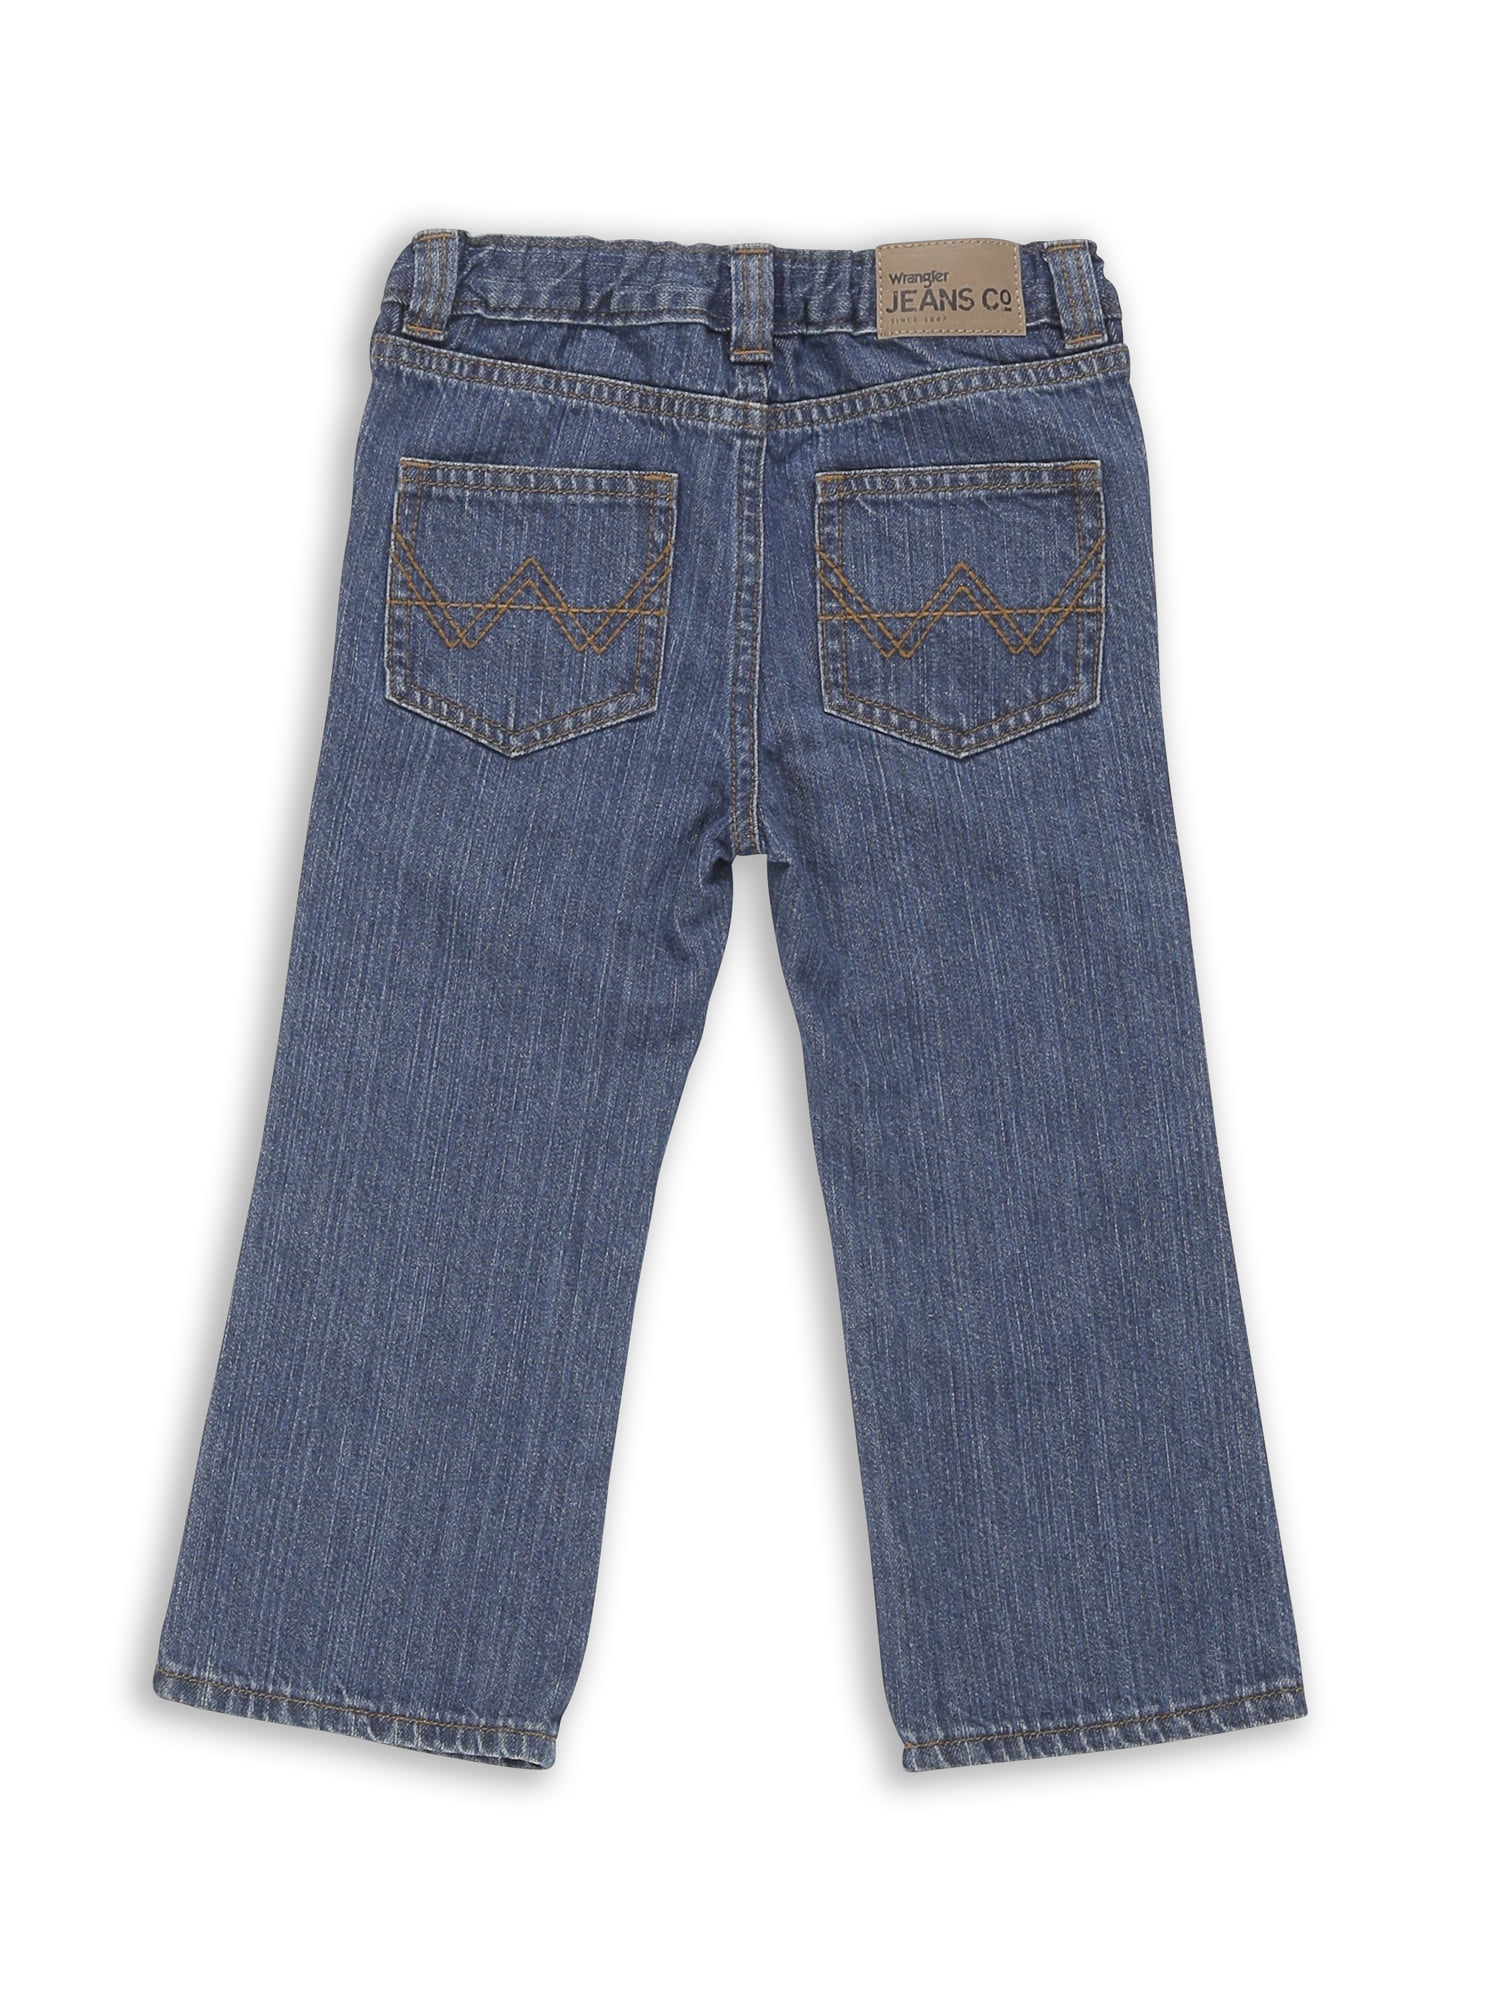 5t bootcut jeans